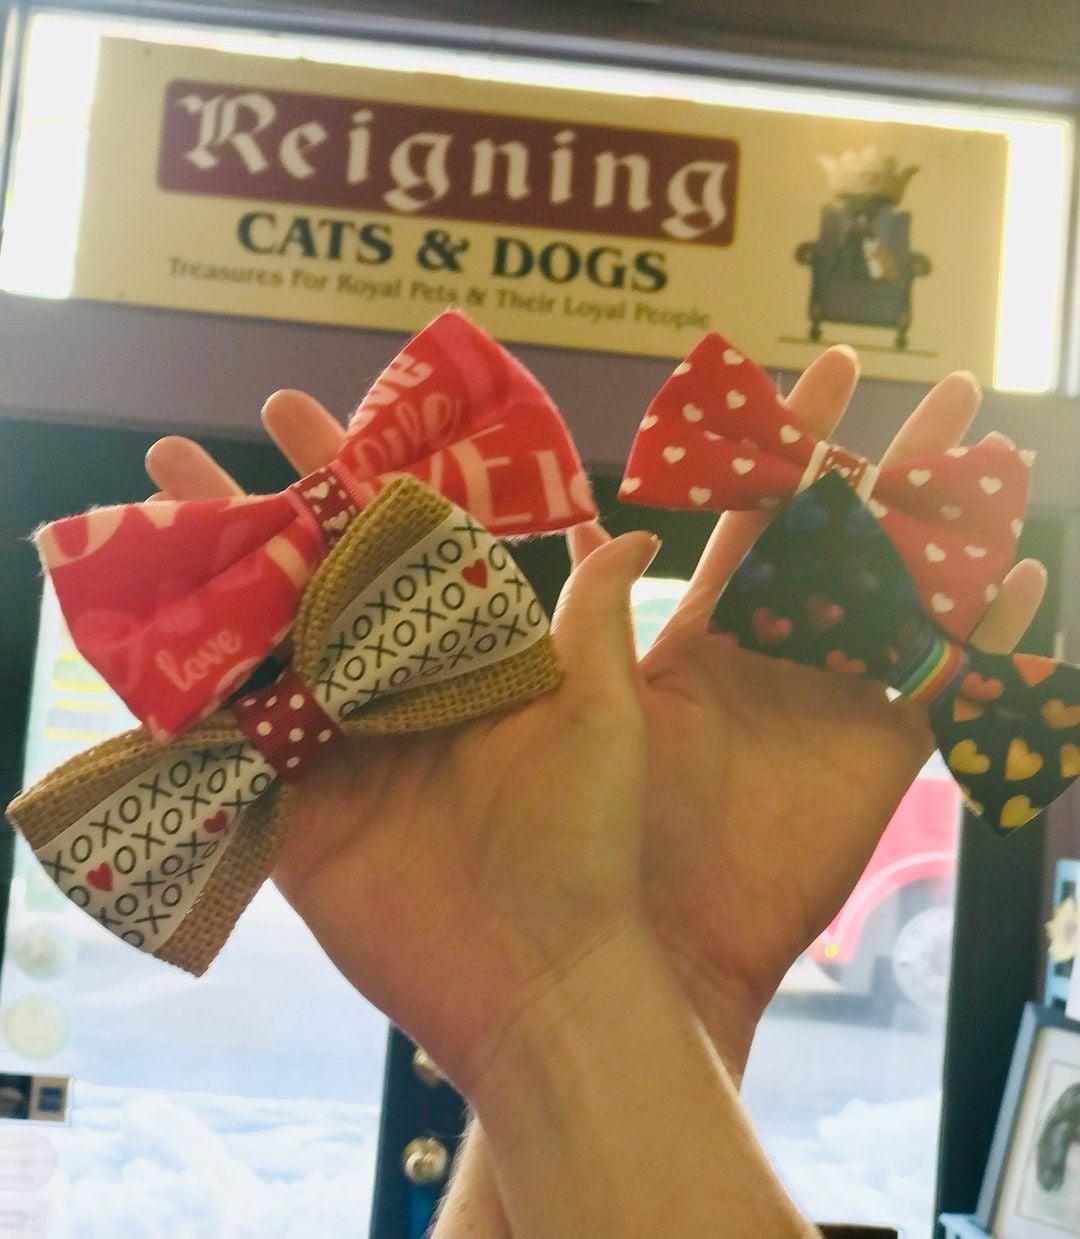 Pet Friendly Reigning Cats & Dogs